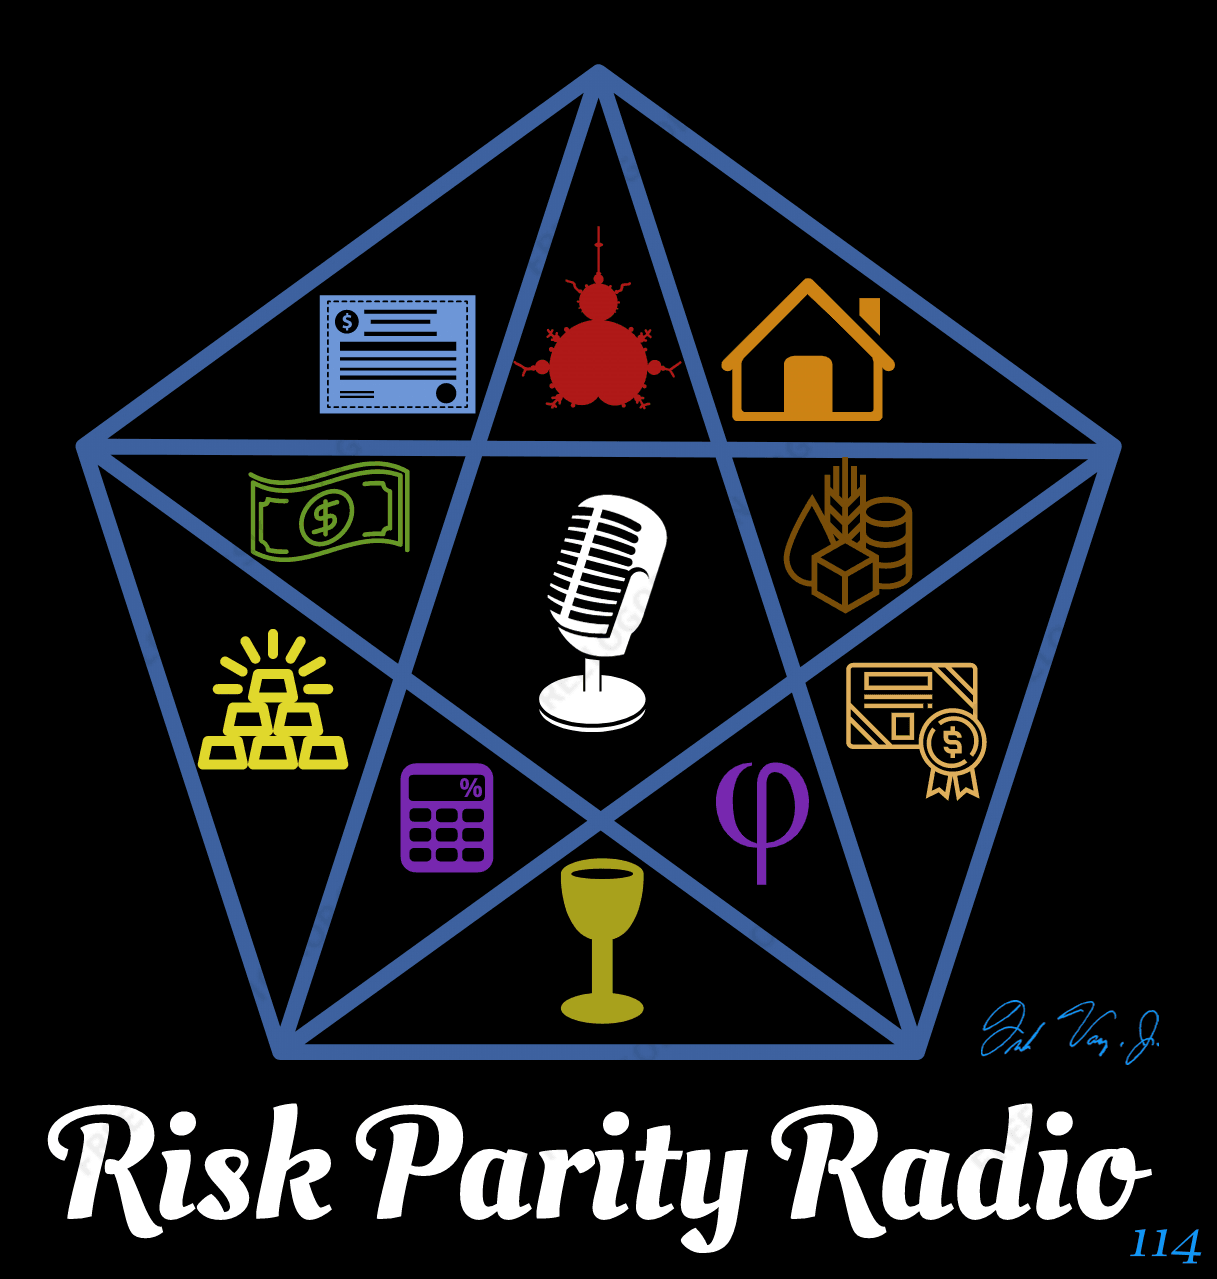 Limited Edition Risk Parity Radio Autographed Print #114